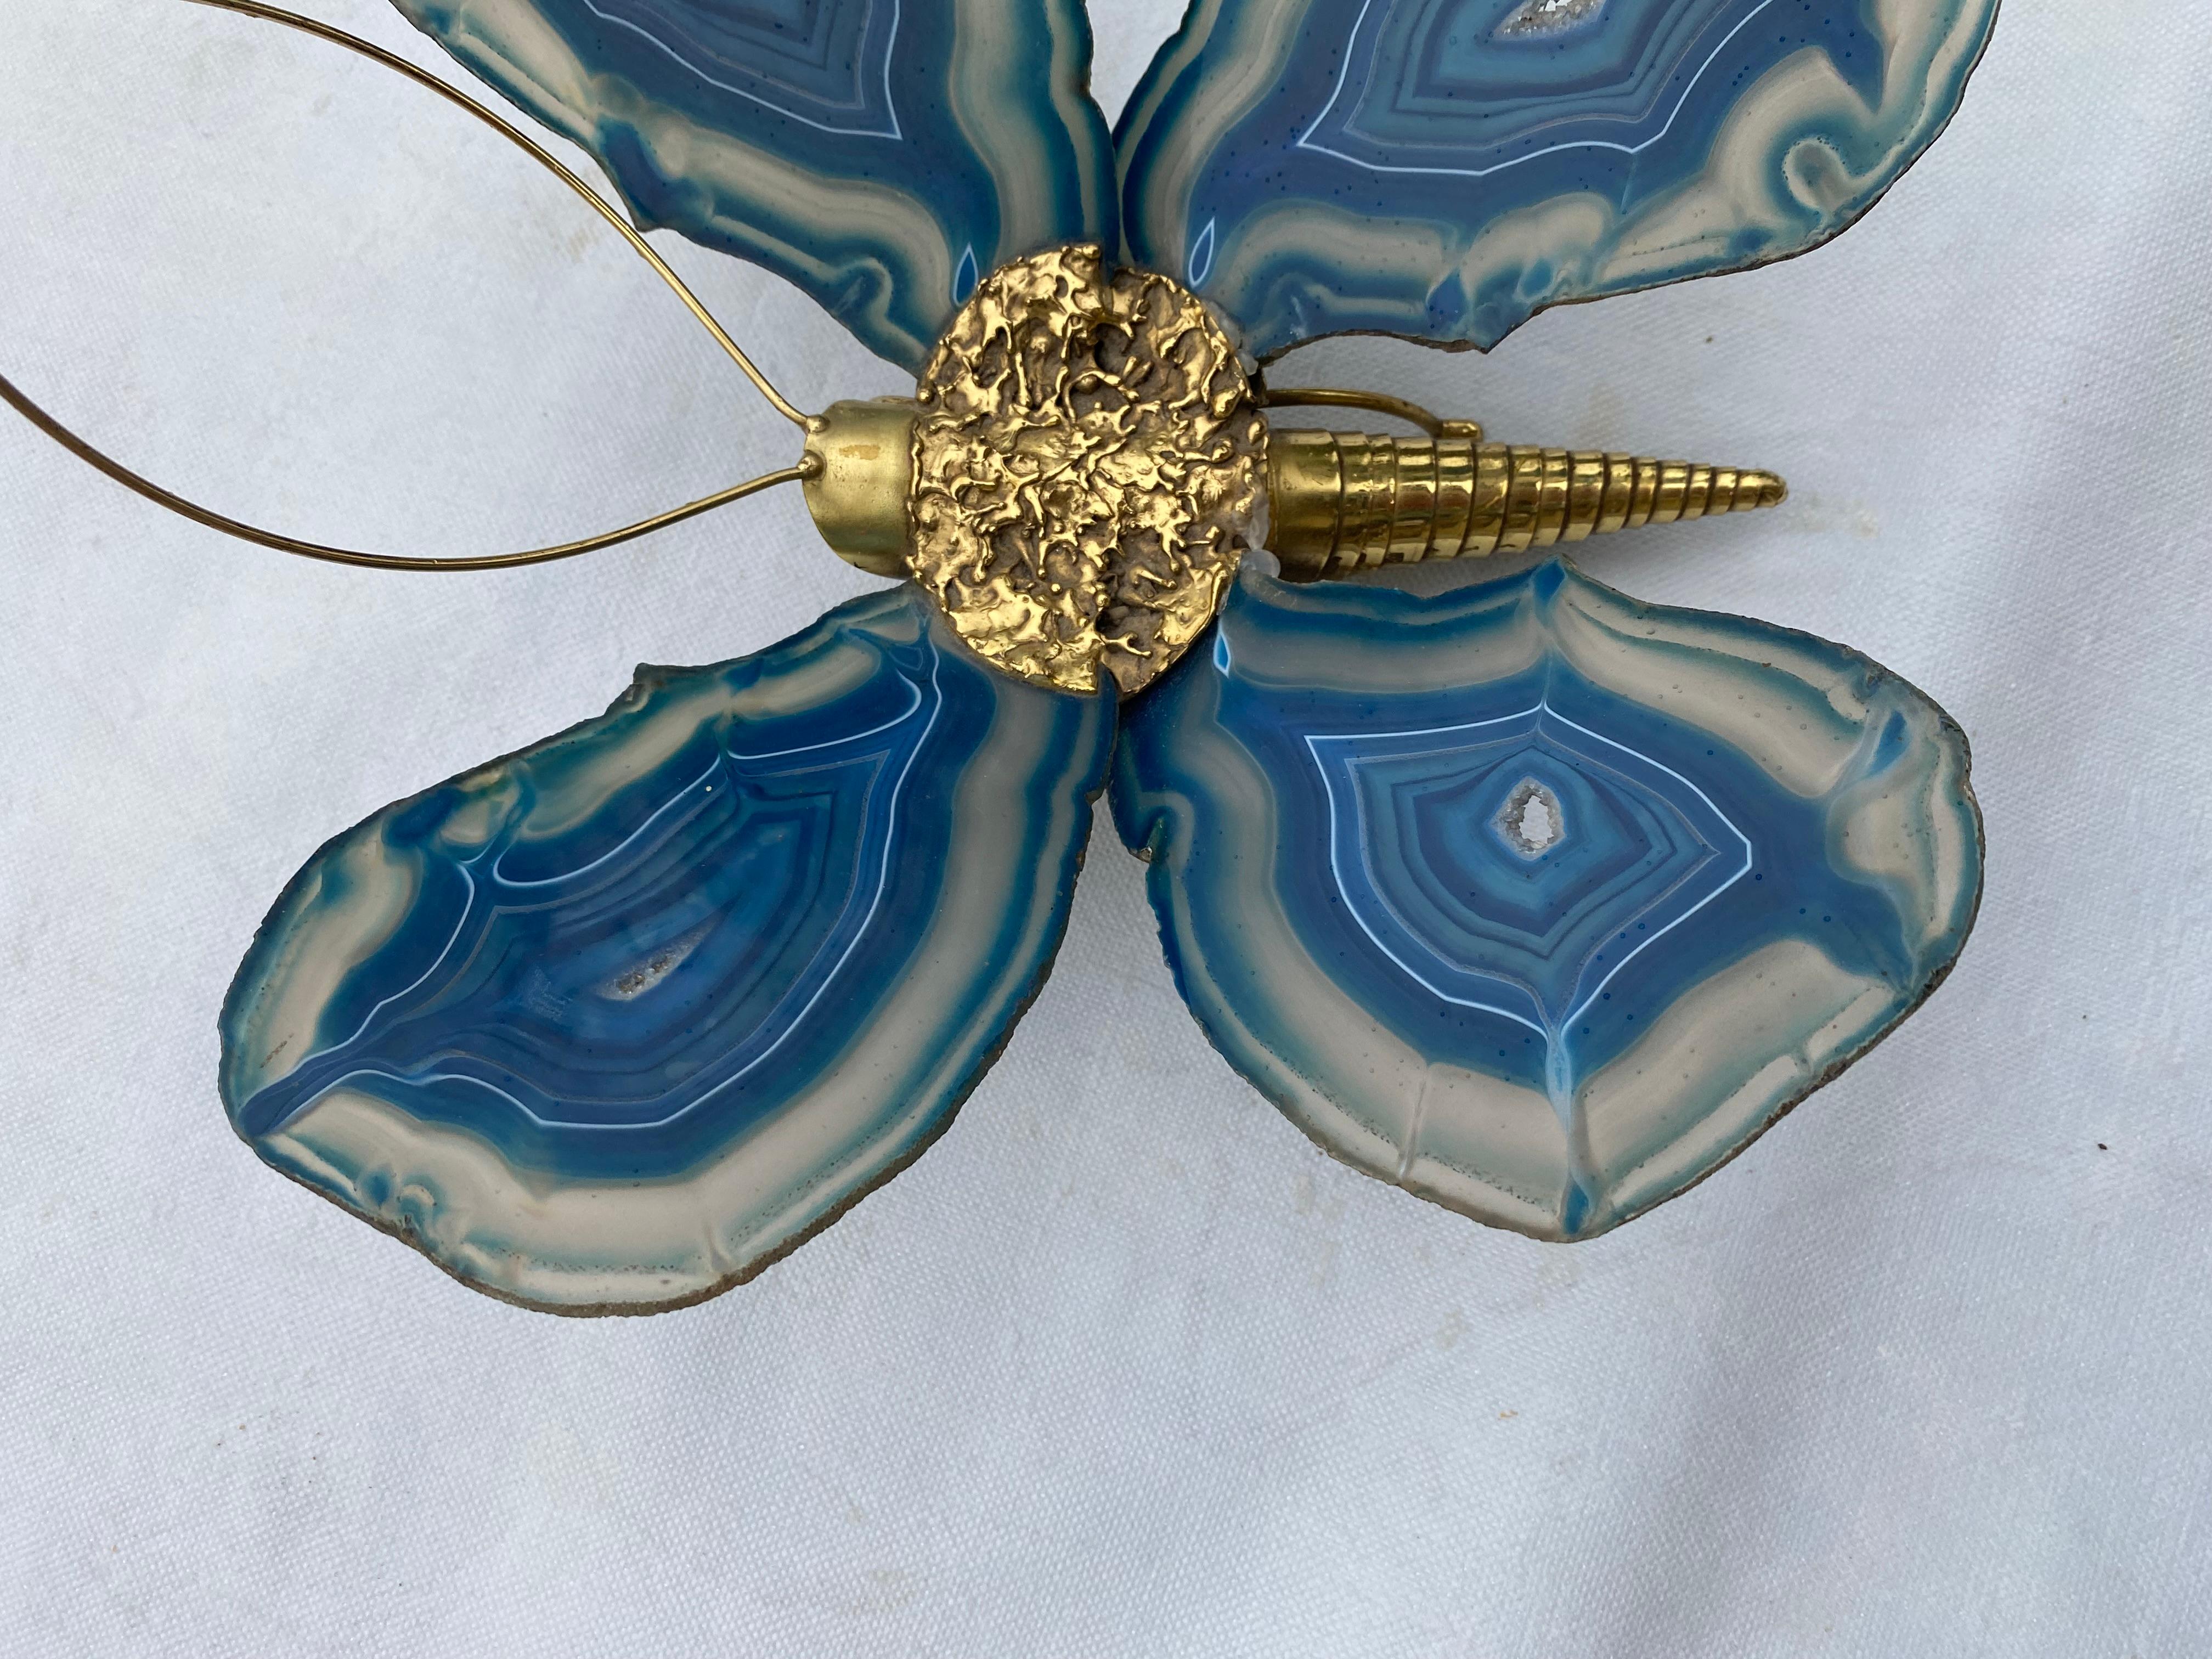 Butterfly wall light in bronze or brass, 1 bulb, blue agate wings, good condition, circa 1970
Wing height: 23 cm
Width: 38 cm
Height: 28 cm
Depth: 13 cm